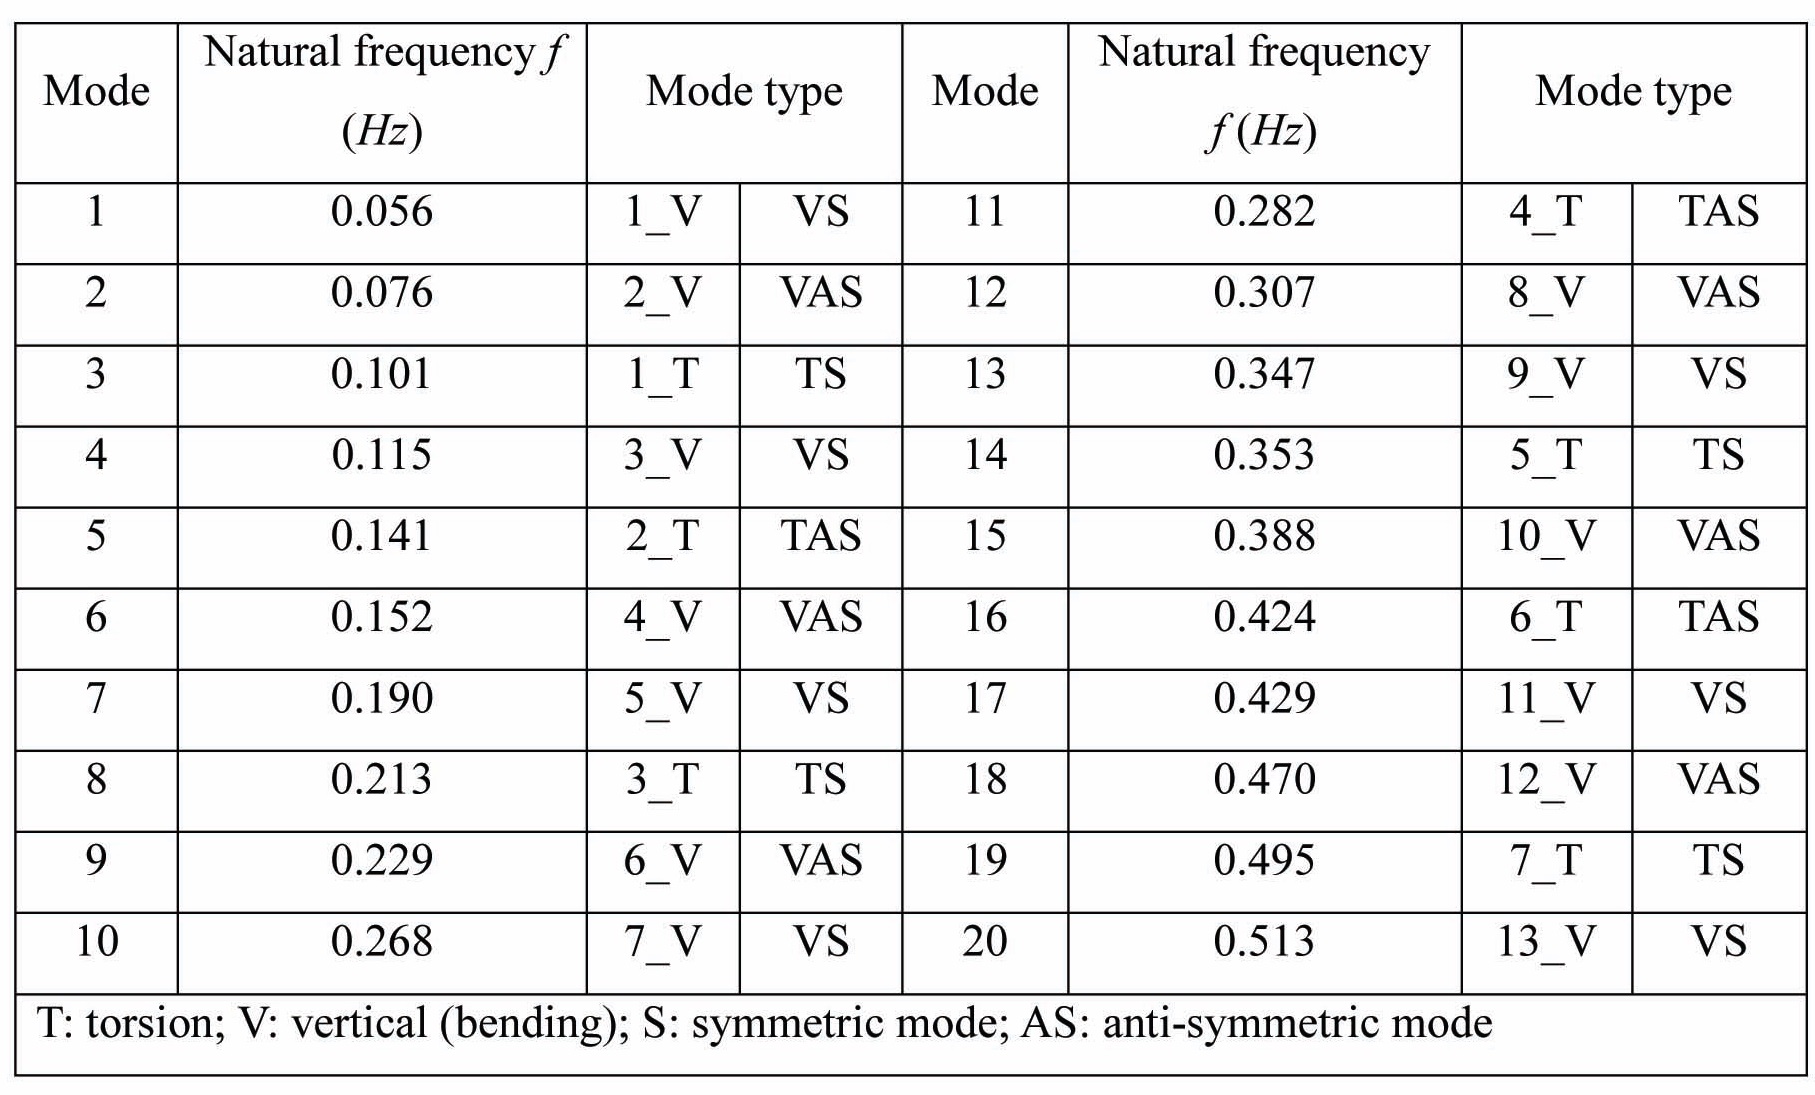 The first twenty natural frequencies of the bridge